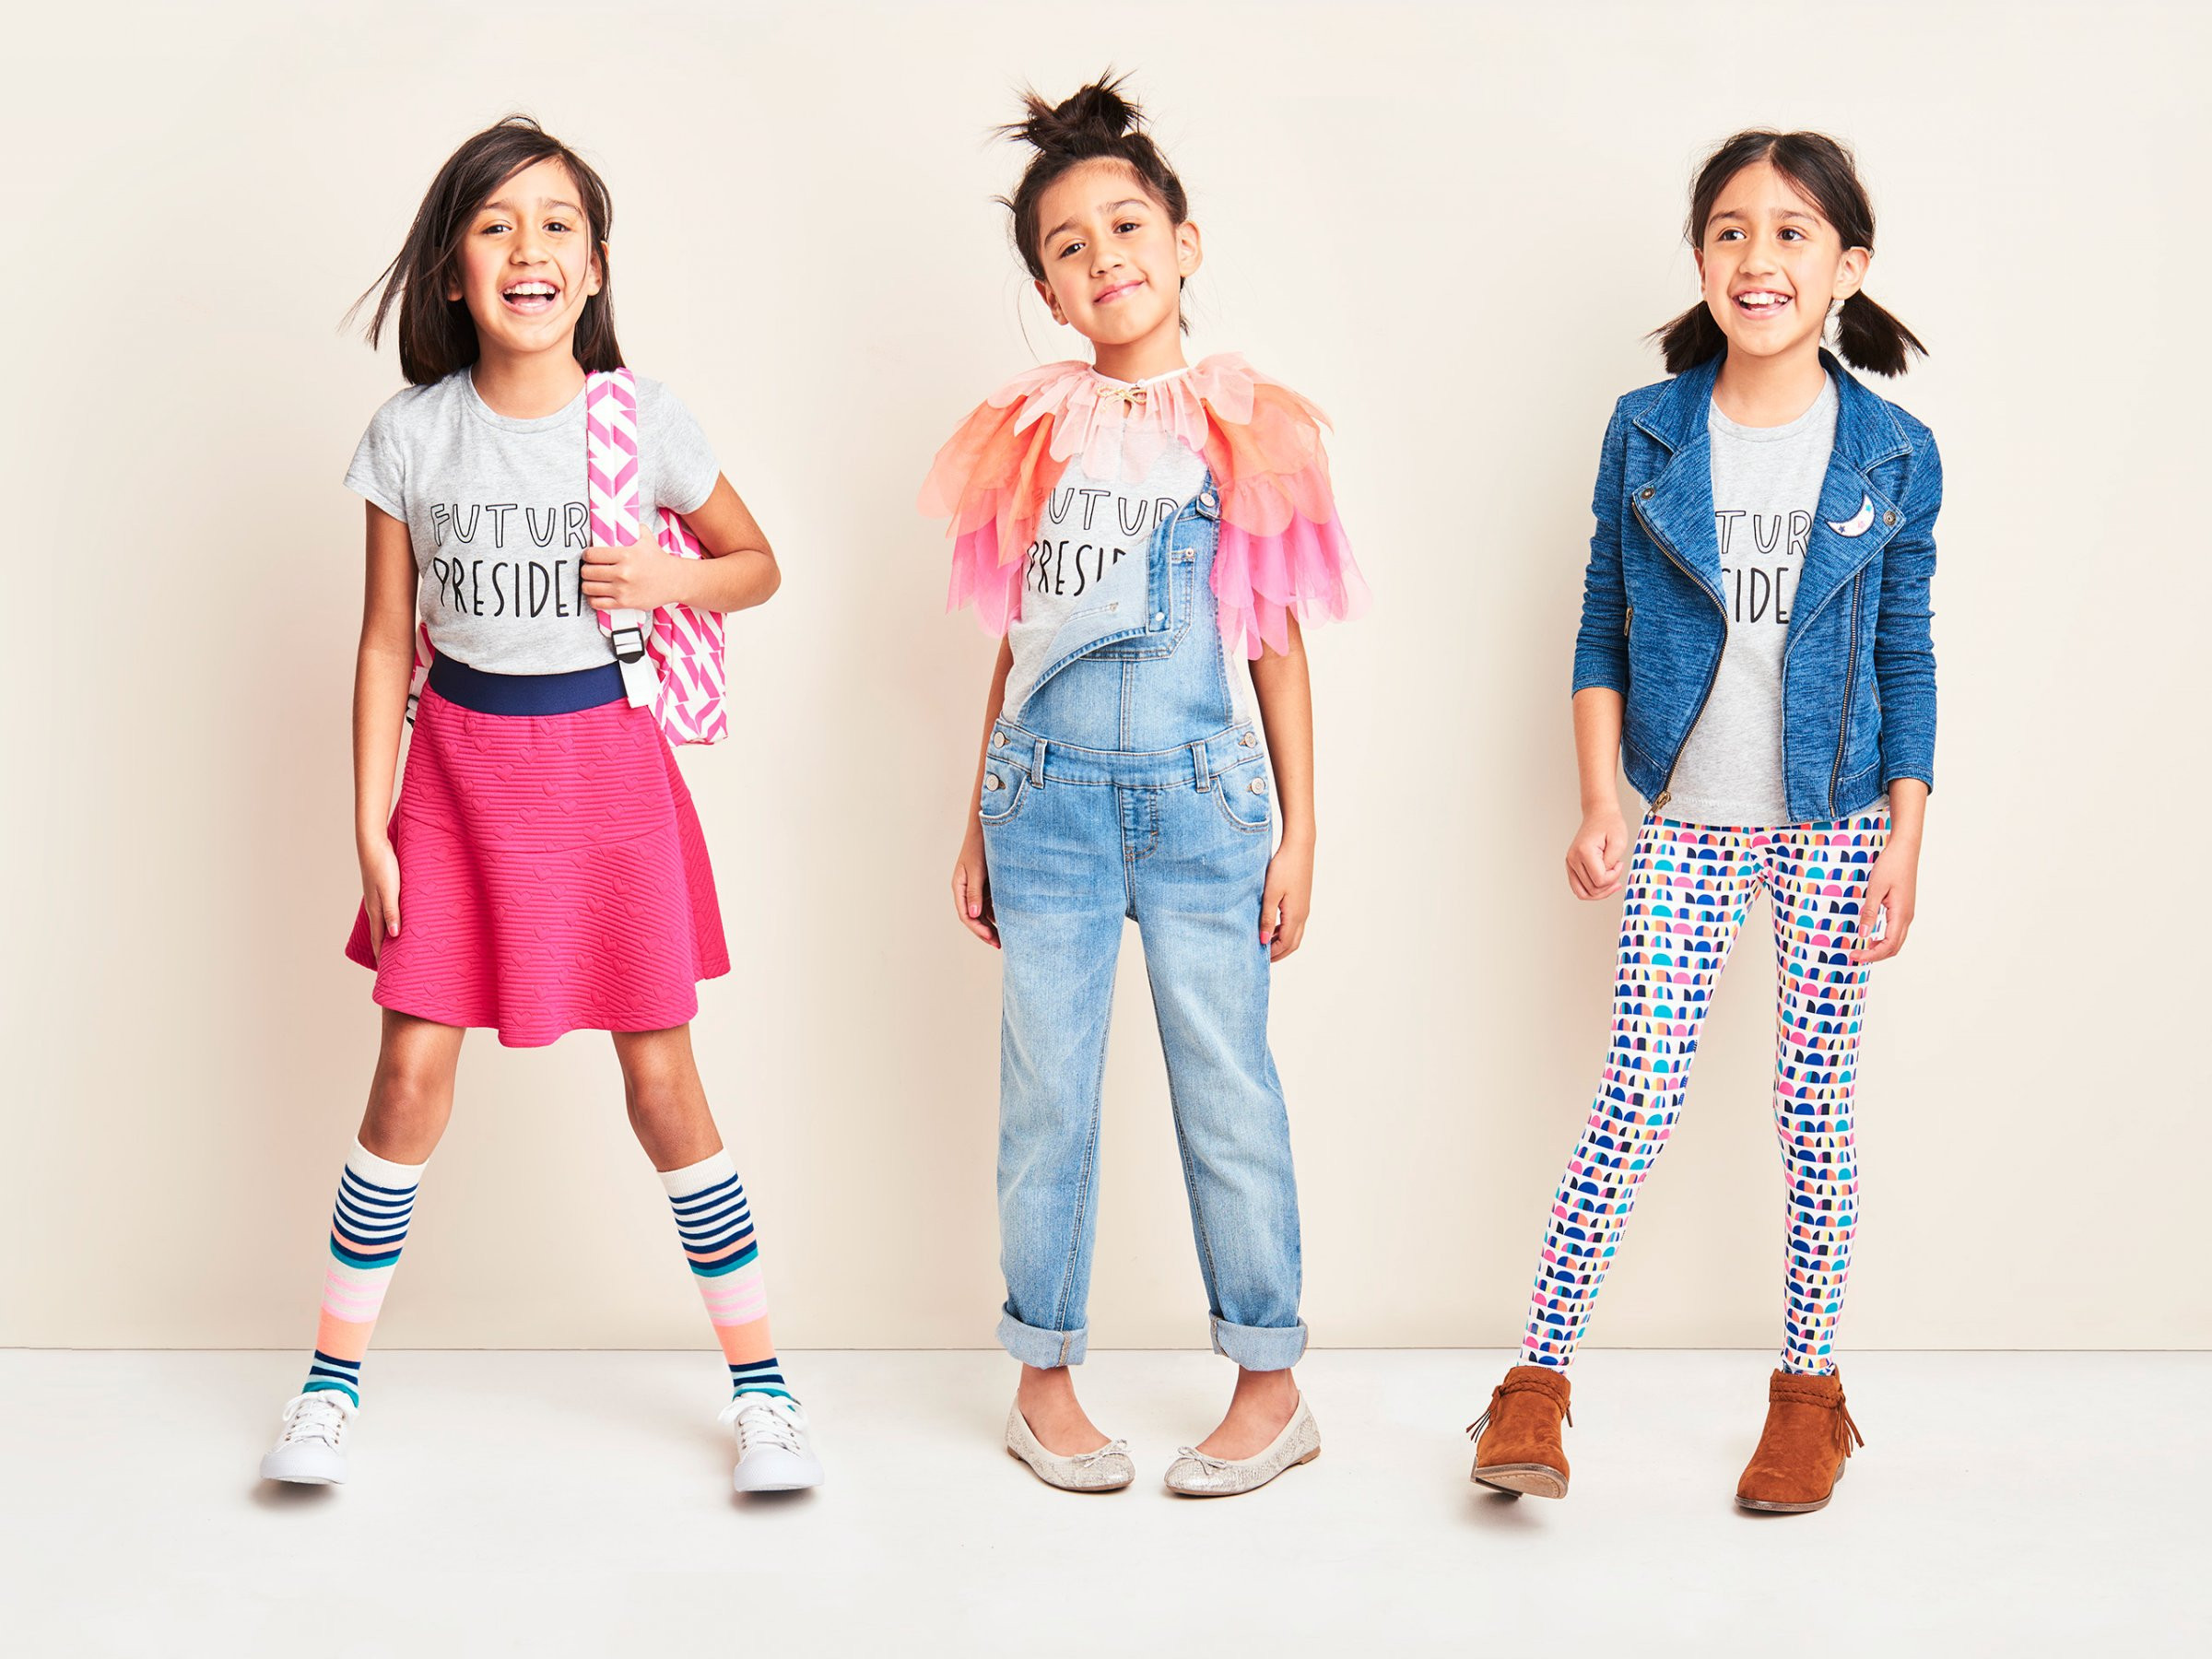 Fashion Clothing For Kids
 Today in awesome Tar debuts new kids clothing line